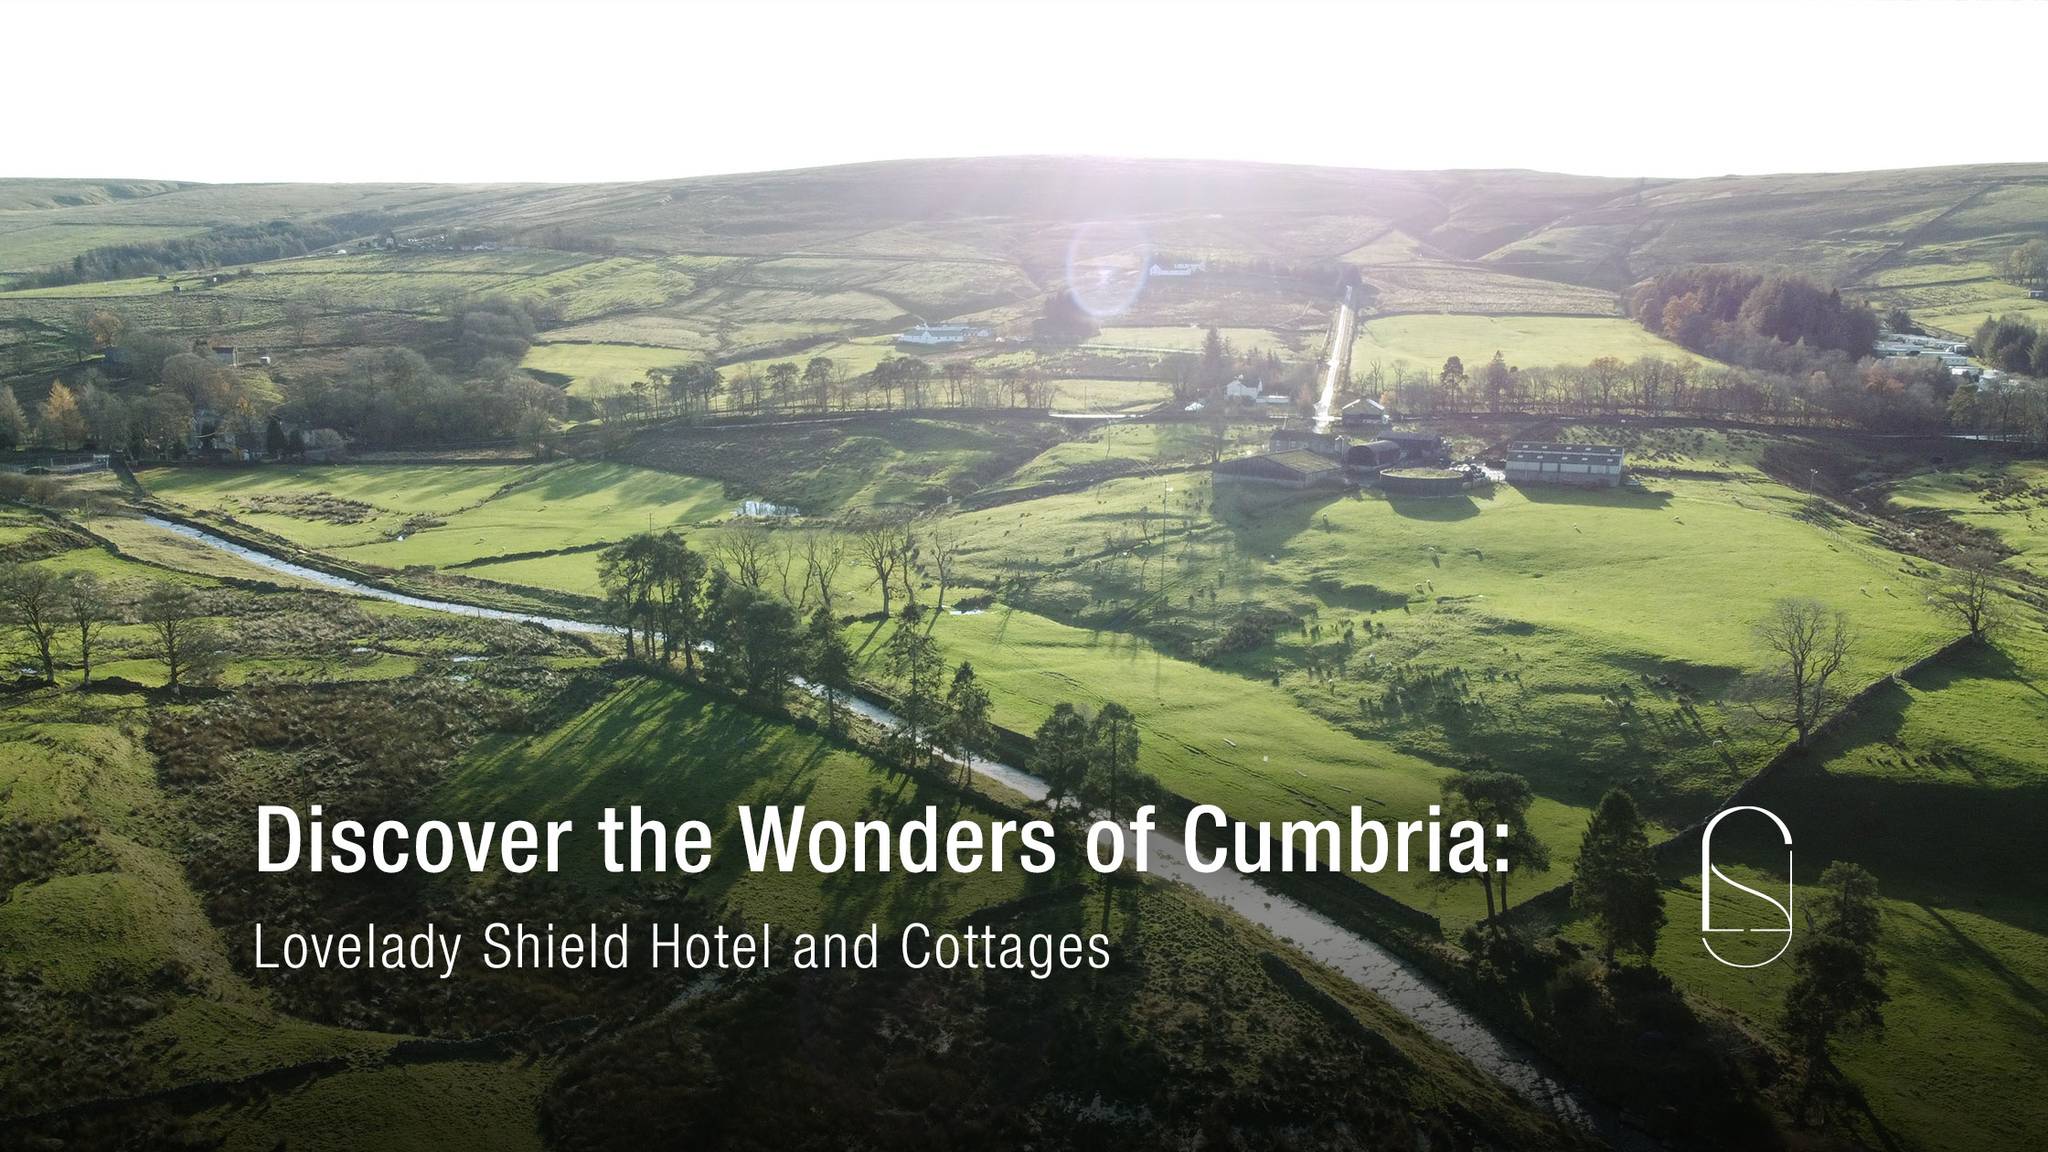 Discover the Wonders of Cumbria: Lovelady Shield Hotel and Cottages